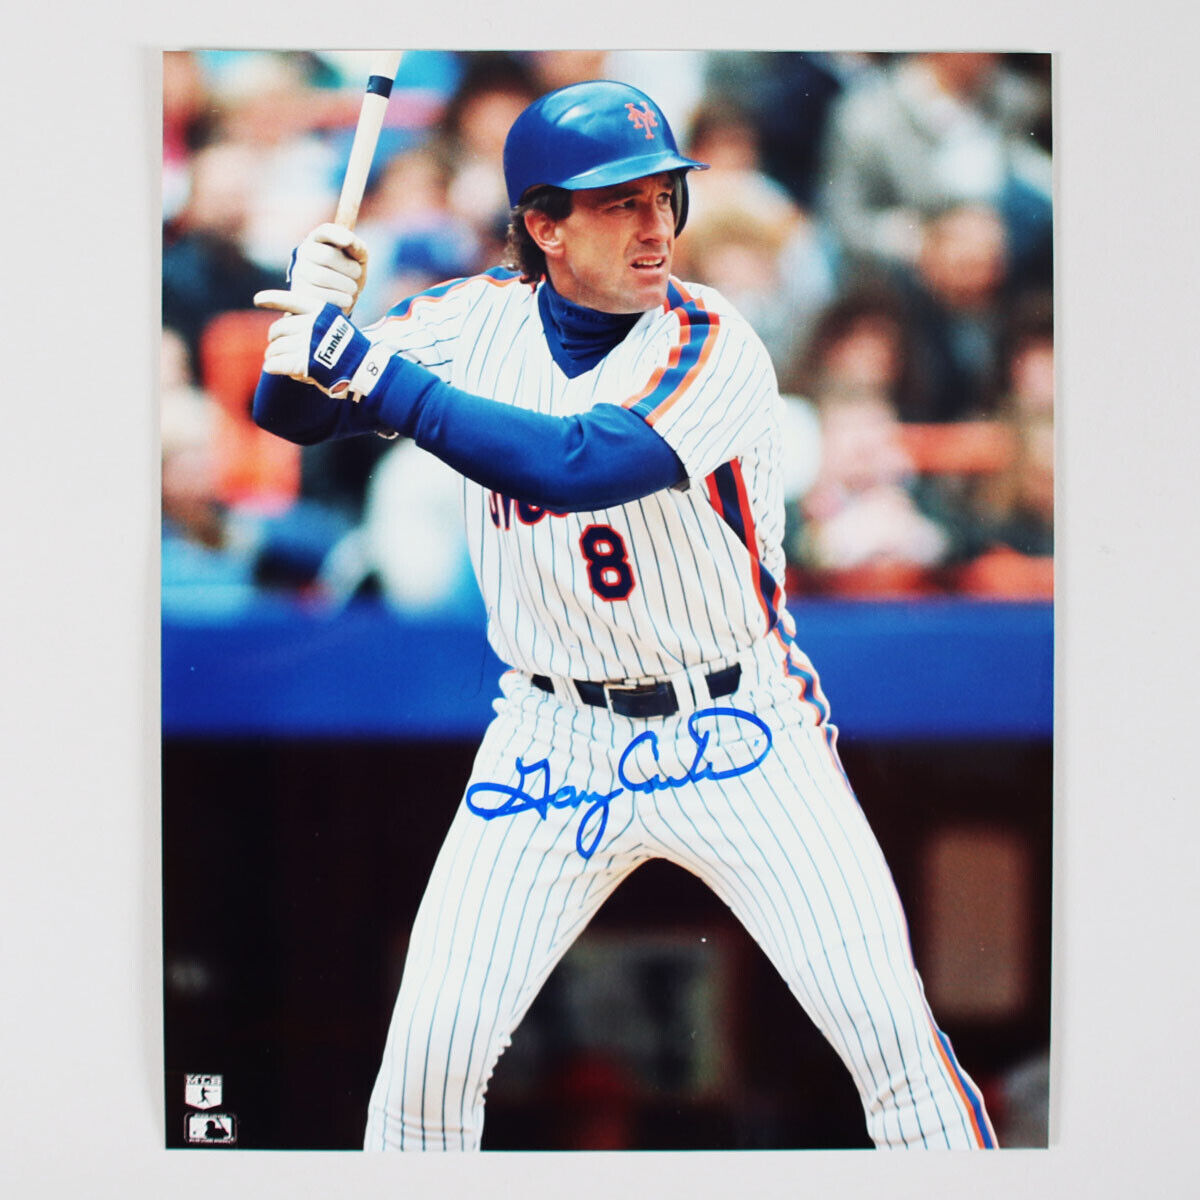 Gary Carter Signed Photo Poster painting 8x10 Mets - COA